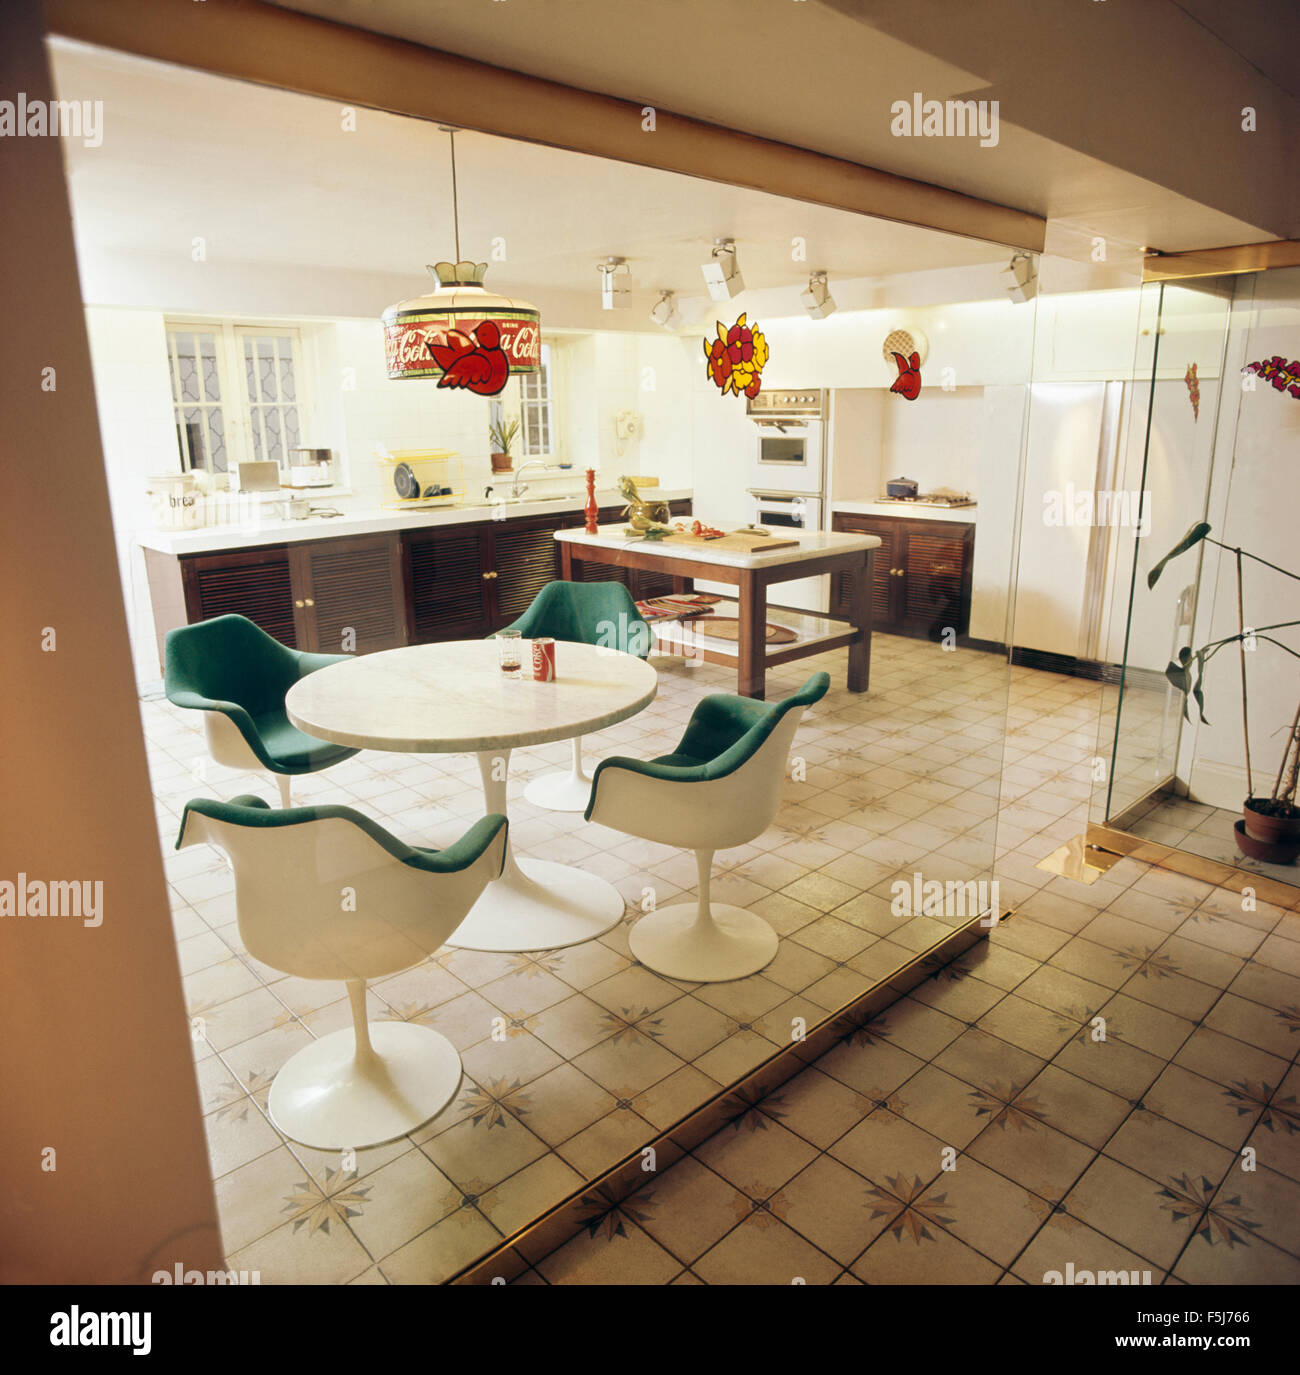 Eero Saarinen Tulip table and chairs in seventies kitchen with glass wall divider Stock Photo